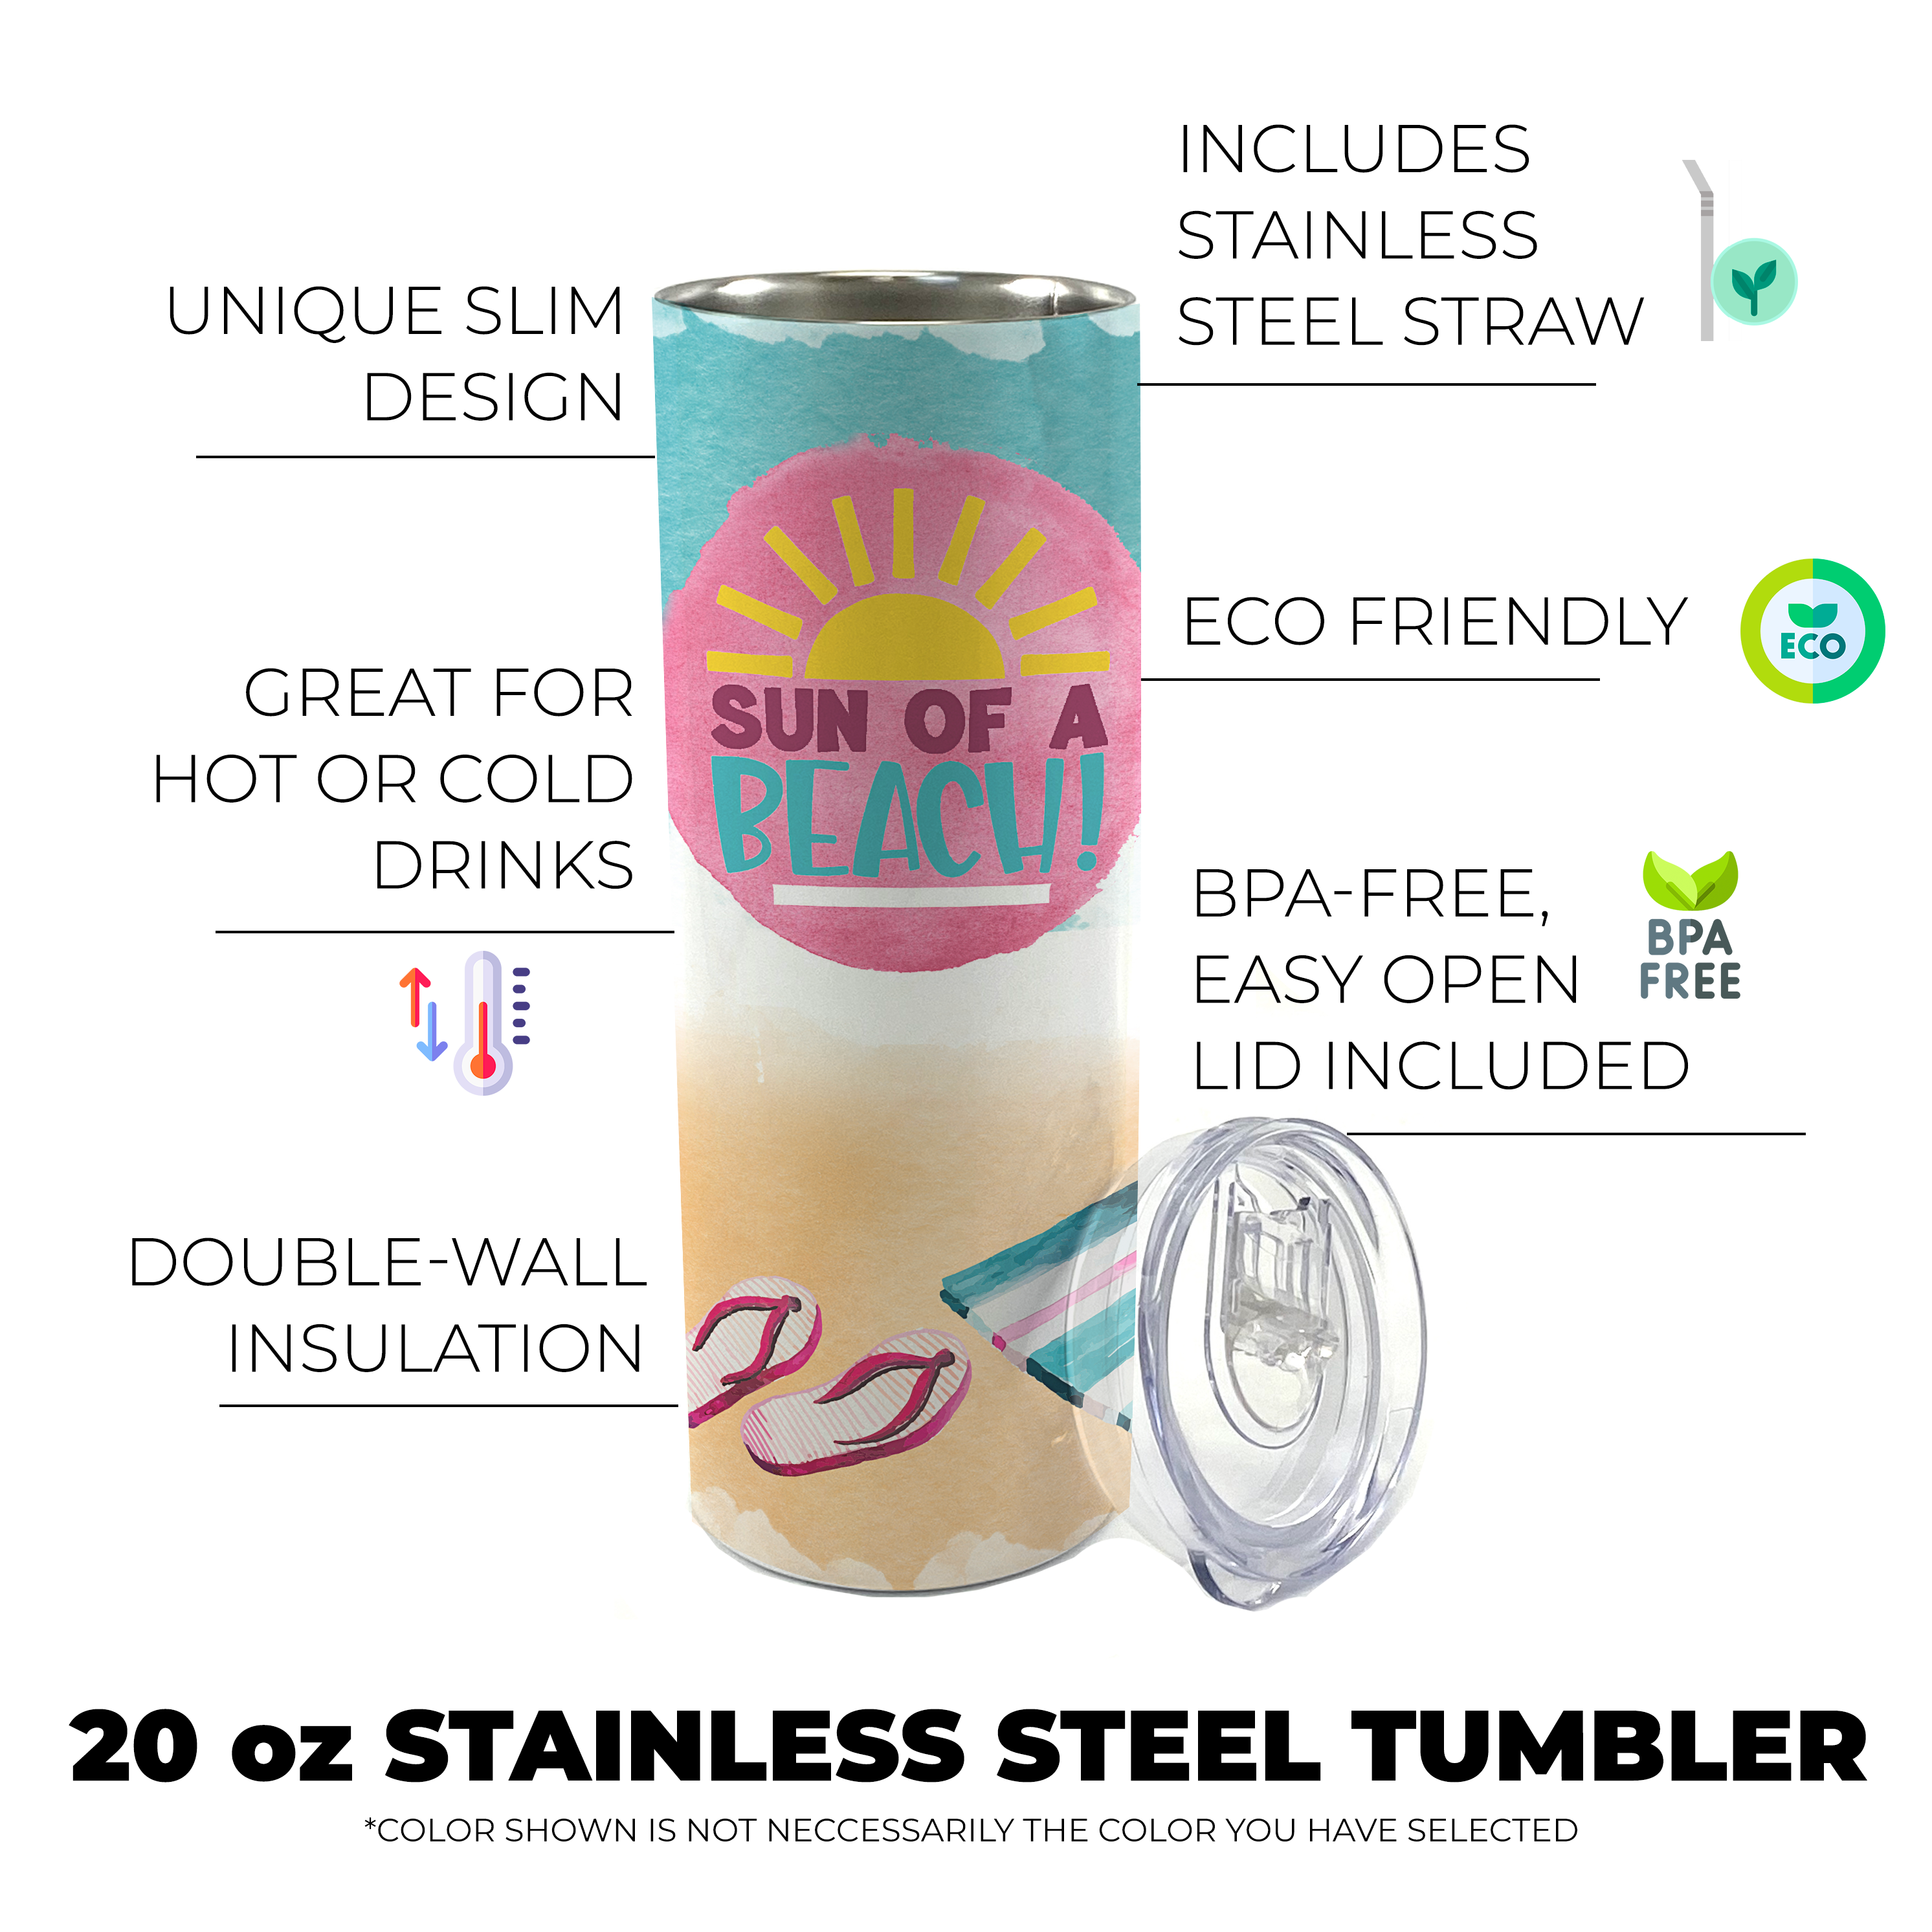 Vacation Collection (Sun of a Beach) 20 Oz Stainless Steel Travel Tumbler with Straw